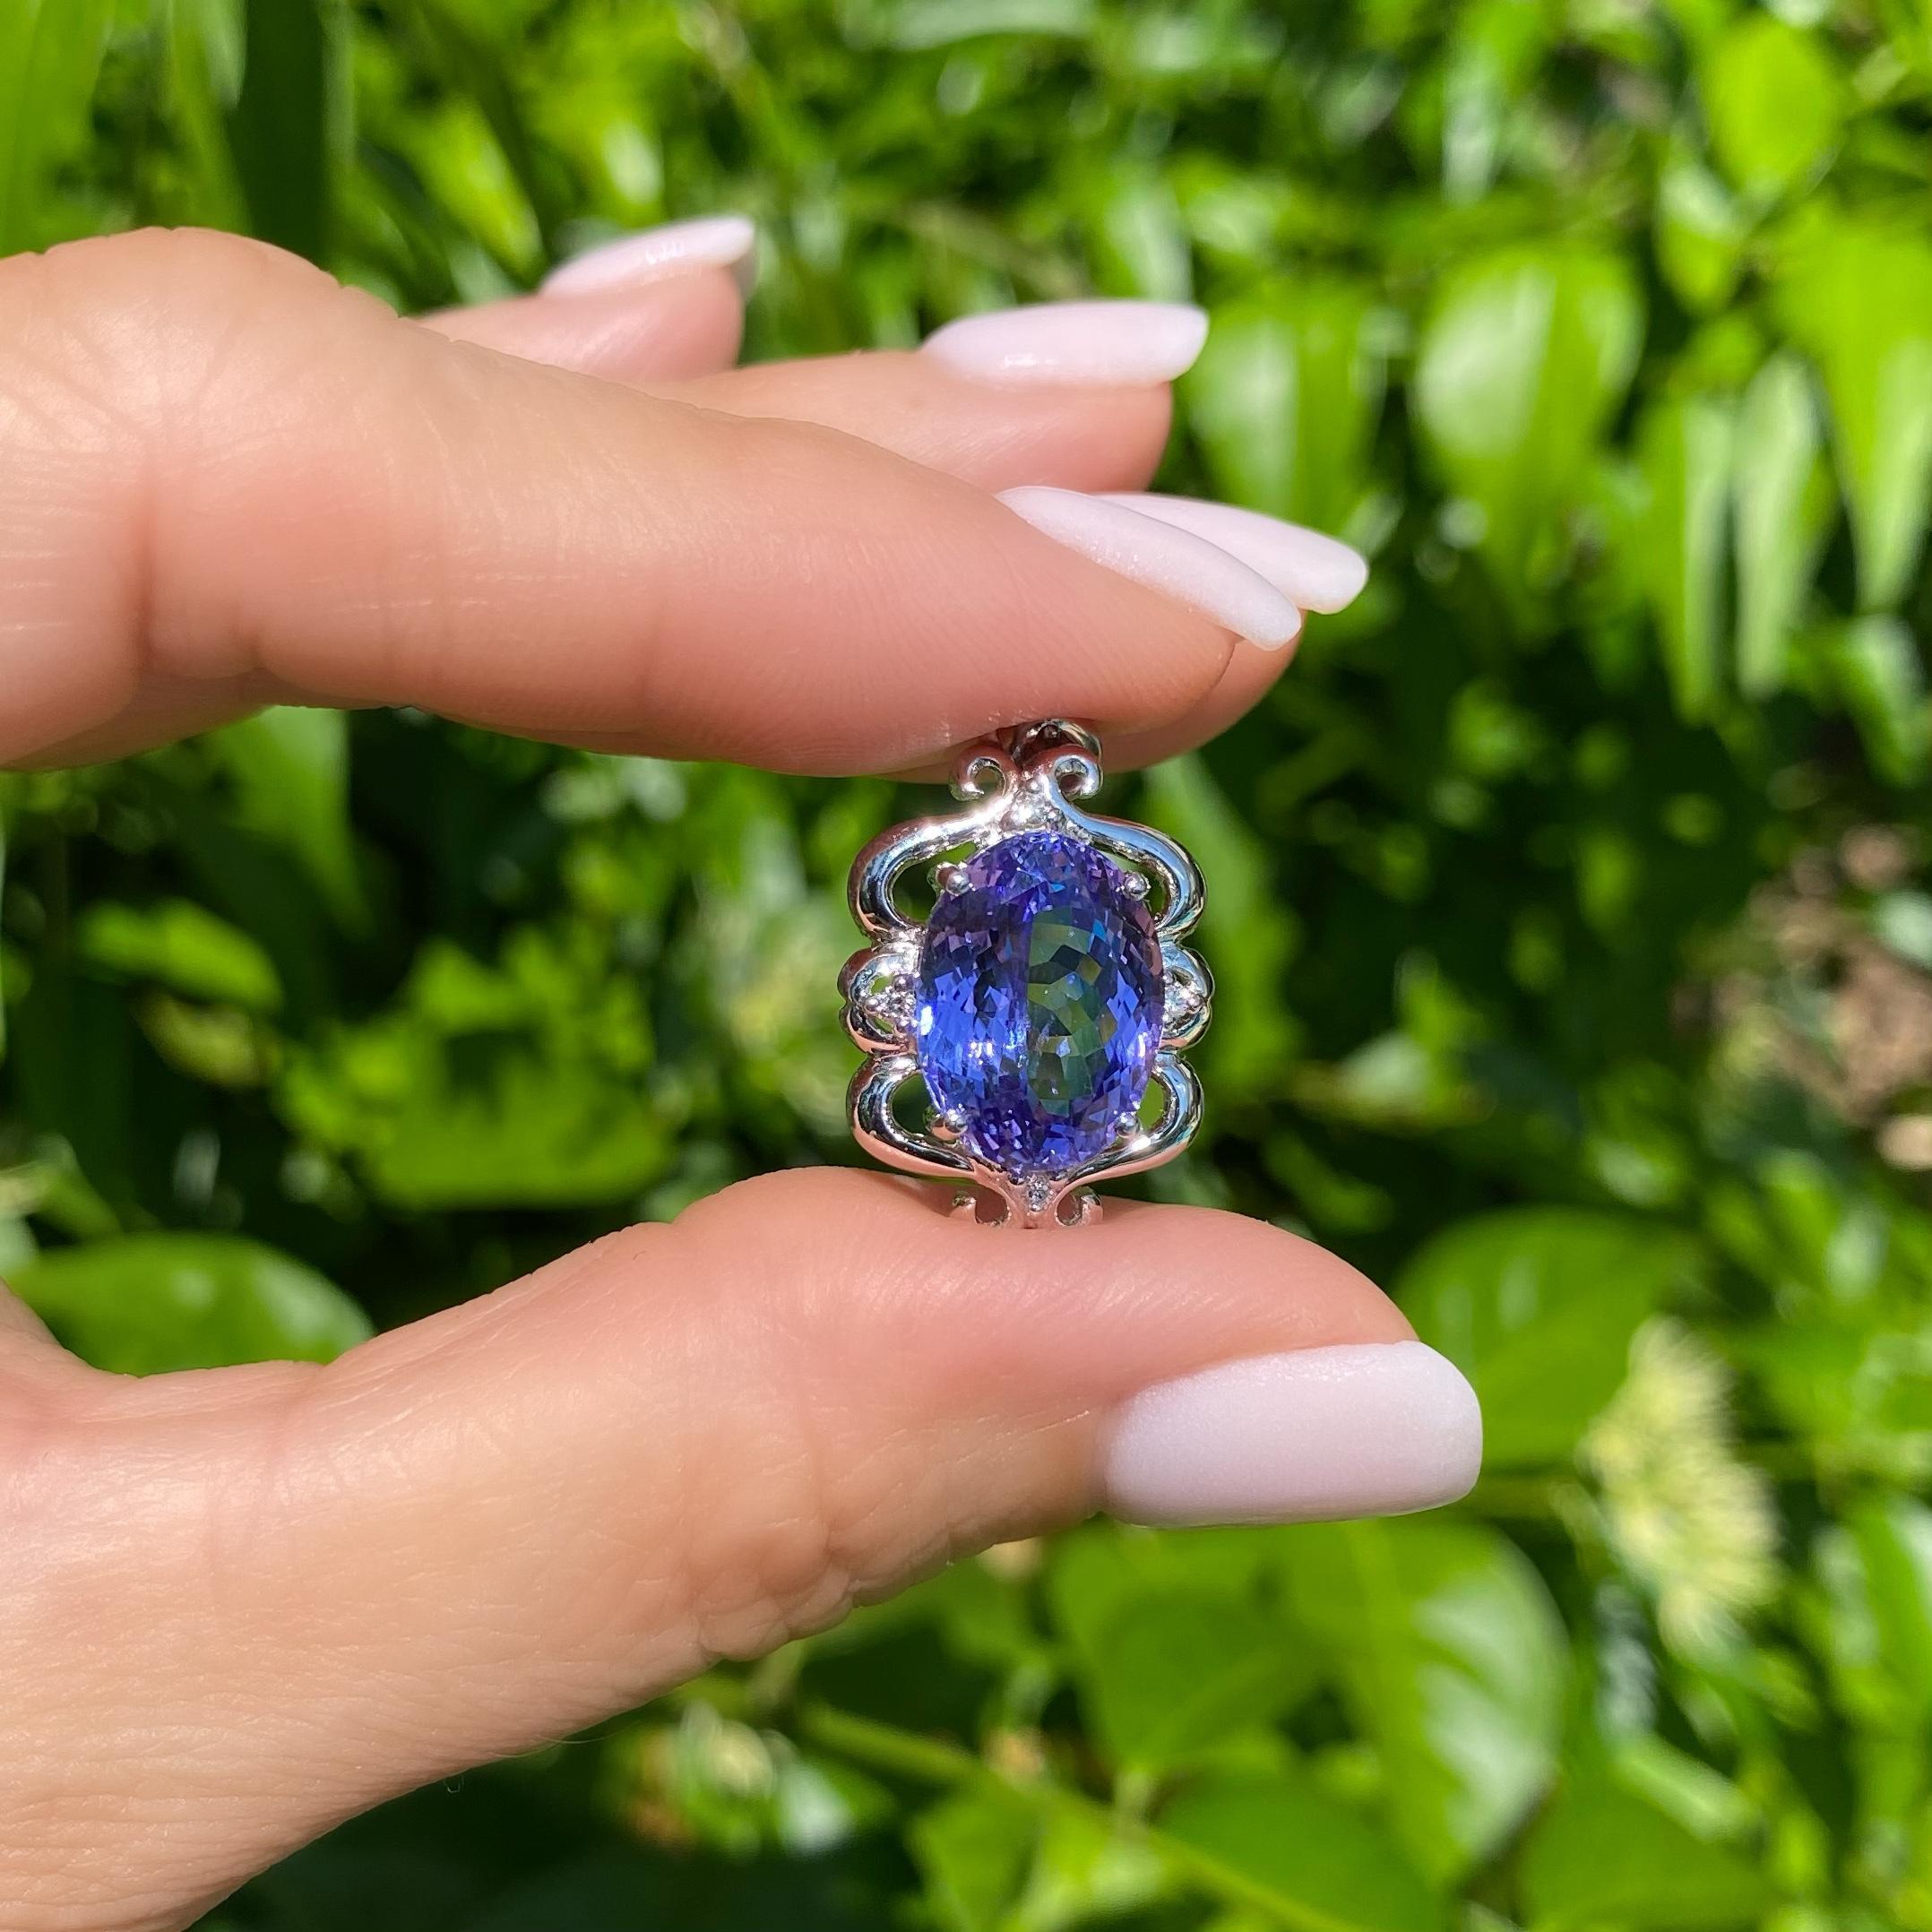 Awesome Tanzanite and Diamond Gold Pendant. Centering a Hand set oval Tanzanite, accented with round Brilliant cut Diamonds approx. 0.05tcw. Hand crafted 18K White Gold mounting. Dimensions: 1.15” l x 0.63” w x 0.28” h. Simply Beautiful! This